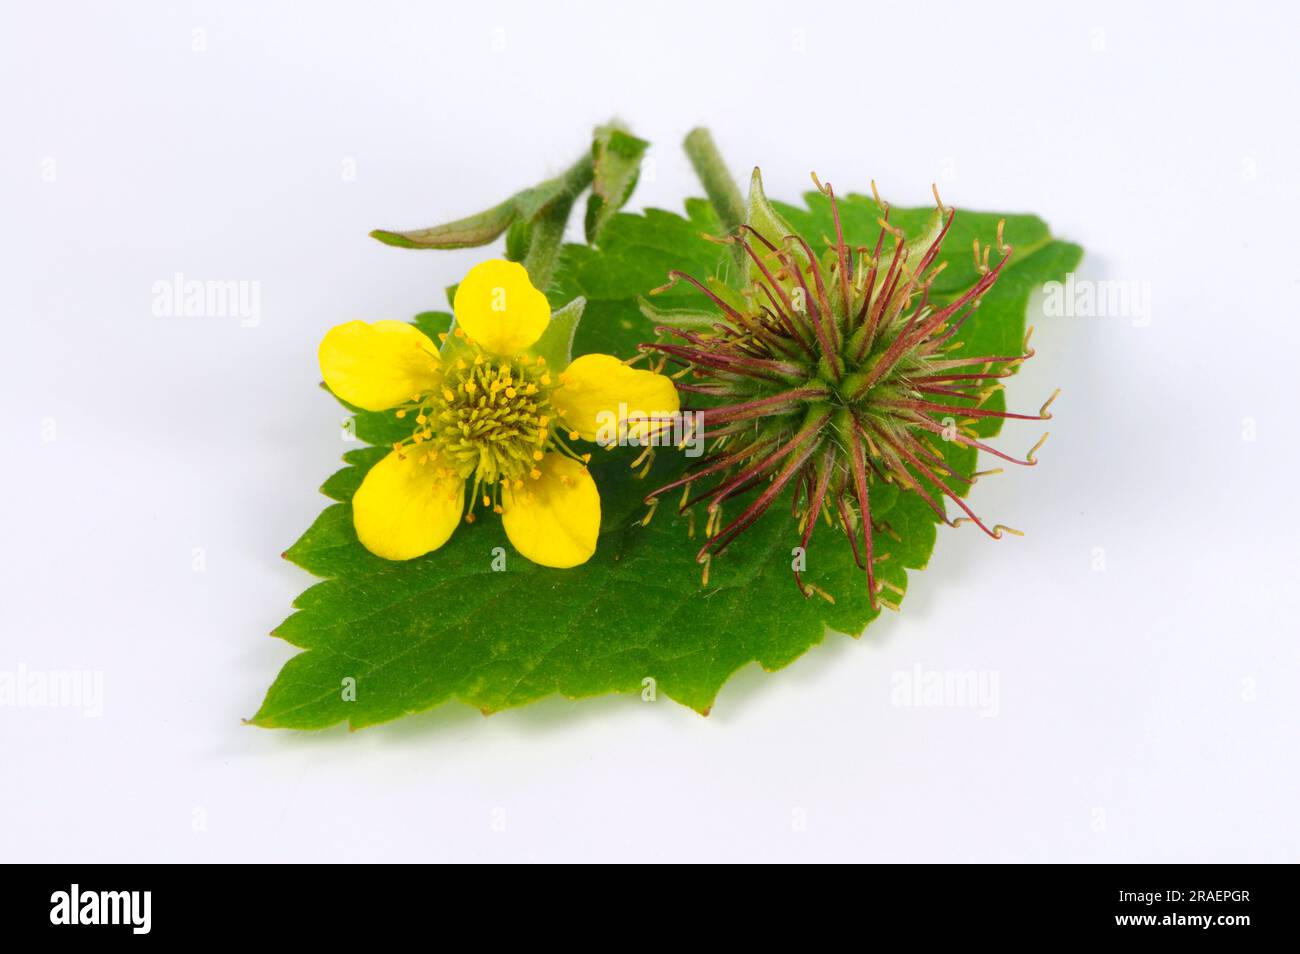 Wood avens (Geum urbanum), Benedicte root, buschnelk root, Hail to all the world, man's strength root, Marz root, wall clove root, nail root, Narden Stock Photo